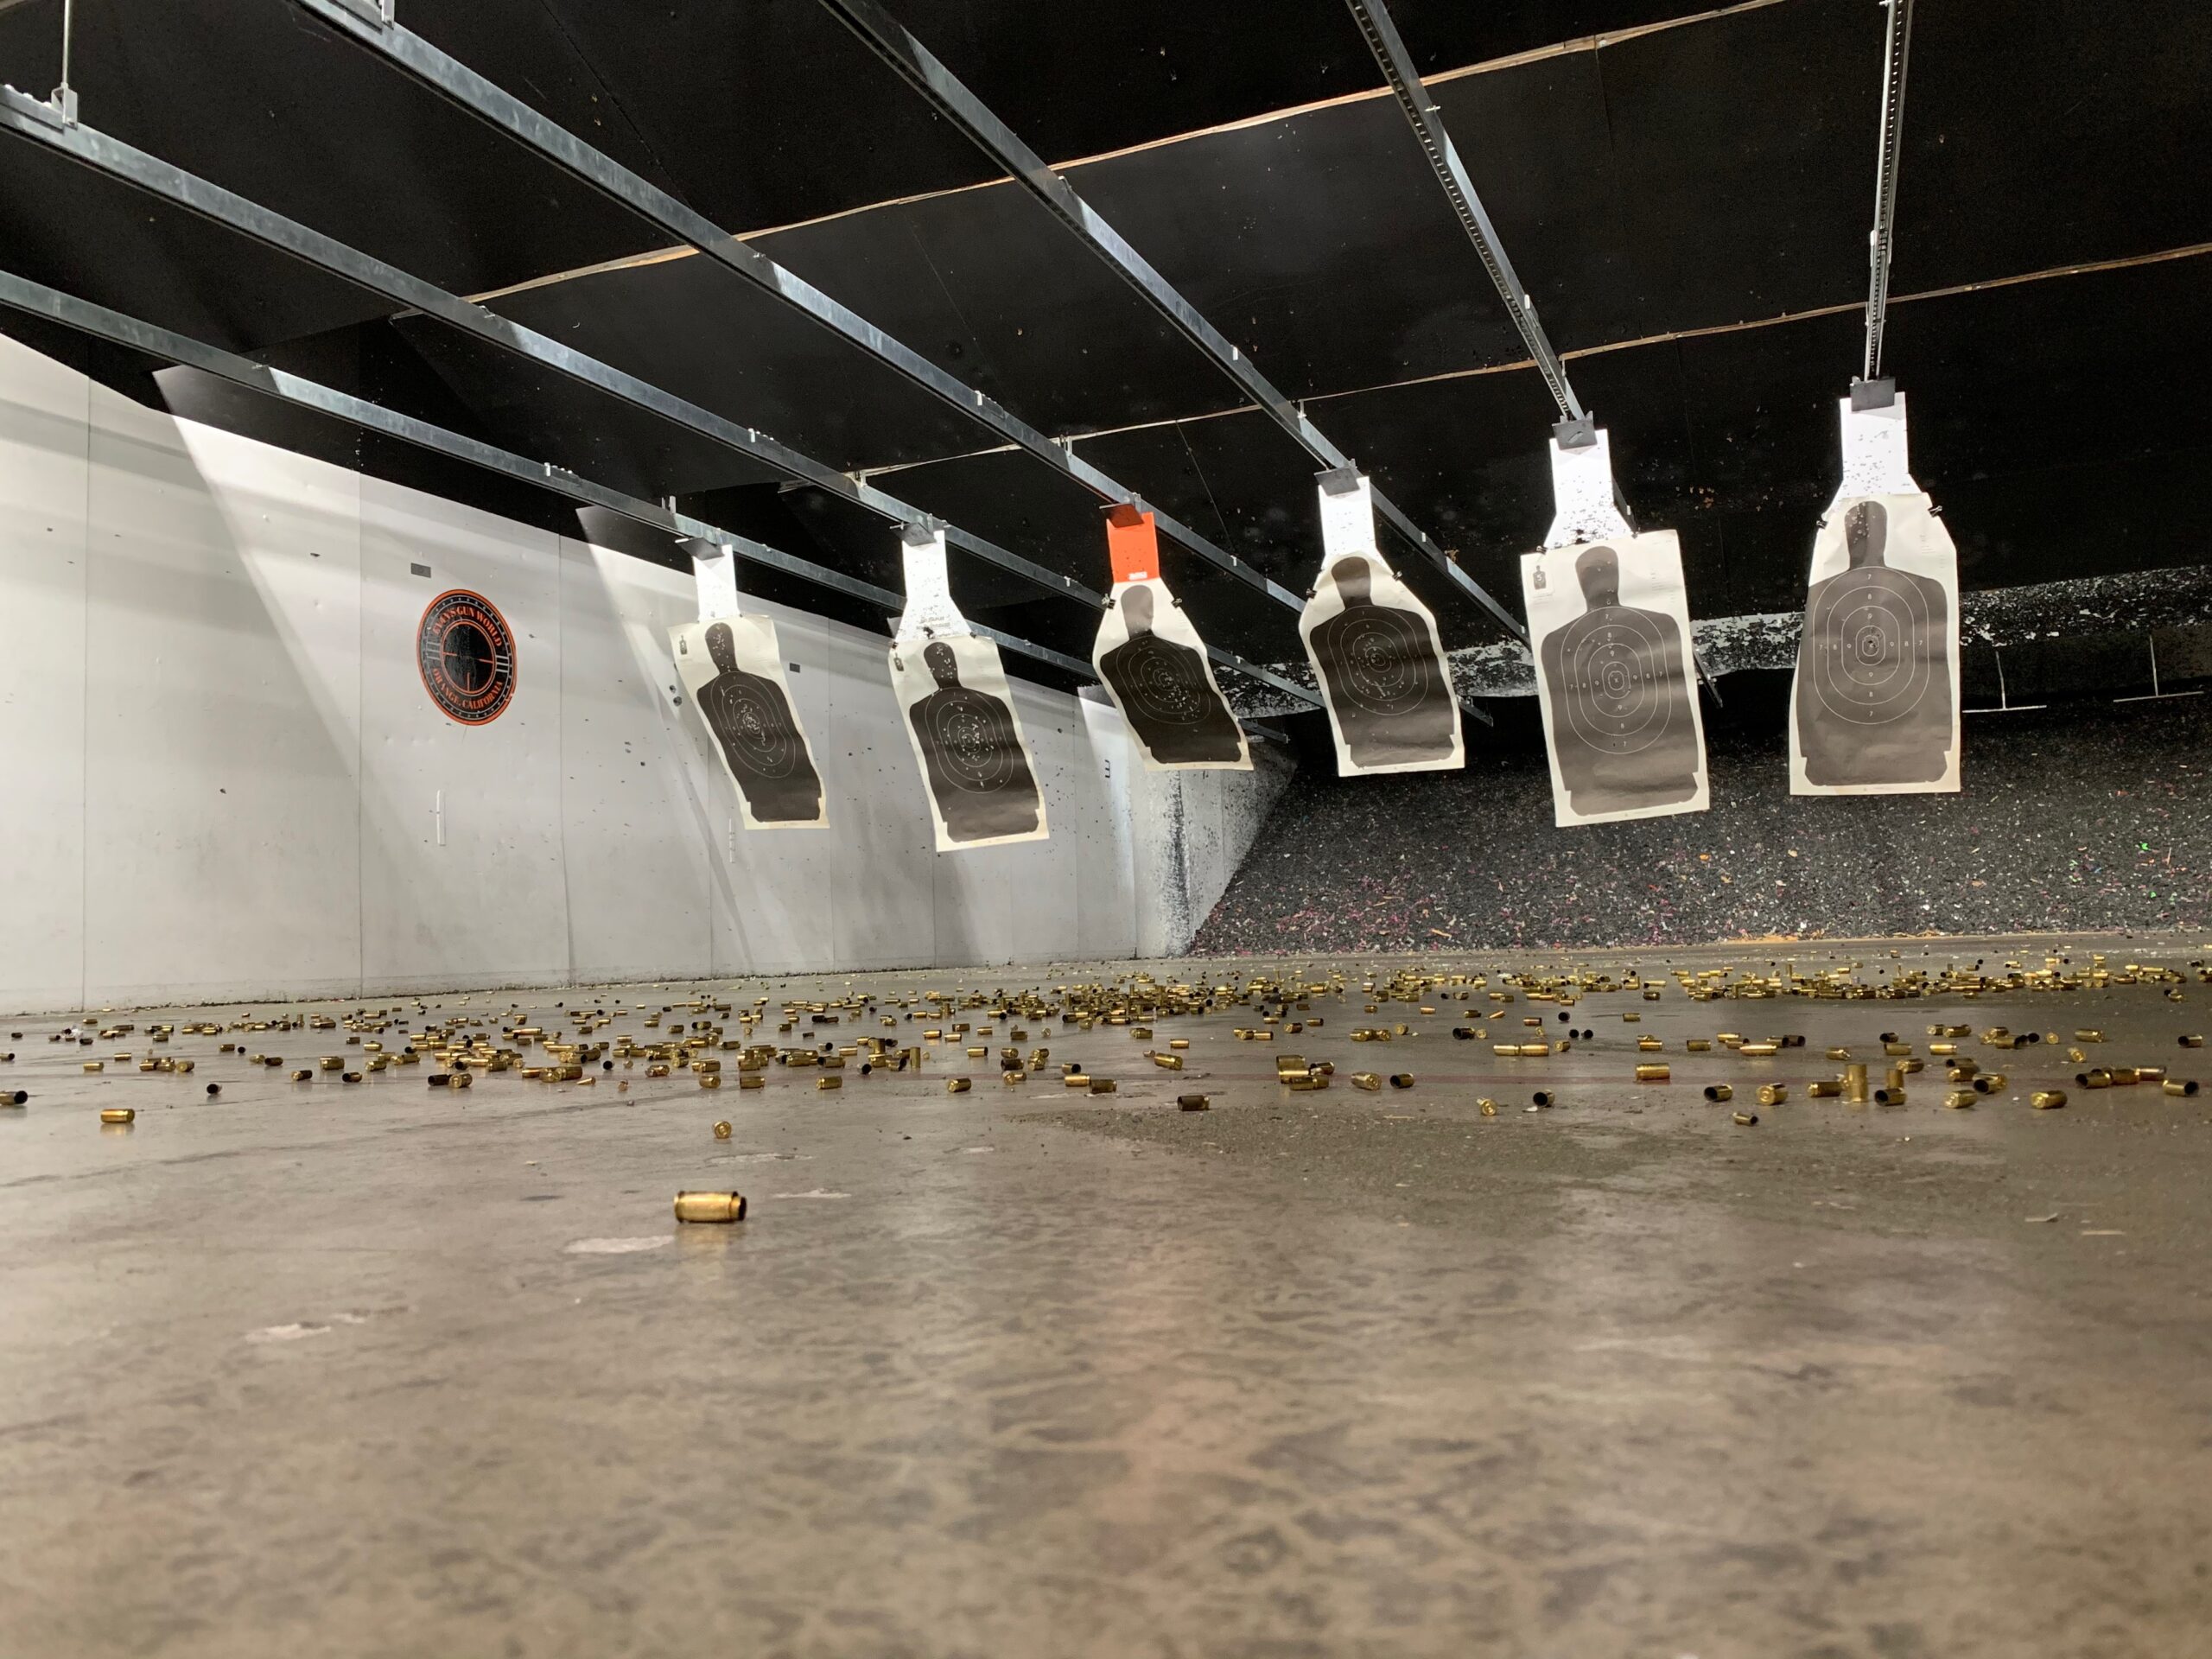 Six Black silhouette targets hanging downrange with casing on the floor of the gun range.